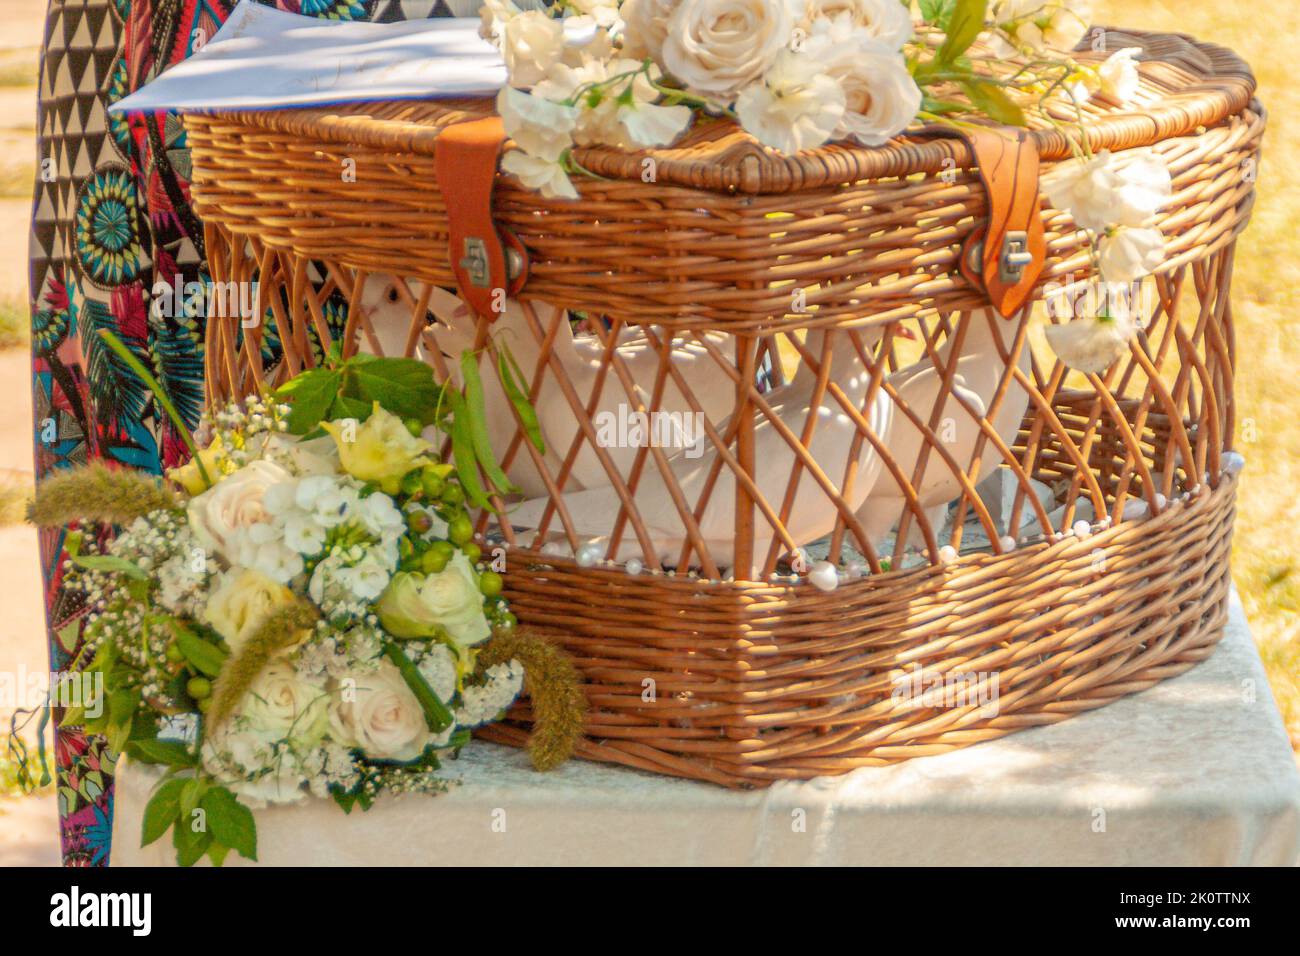 woven basket with white doves waiting for their flight at a wedding celebration Stock Photo